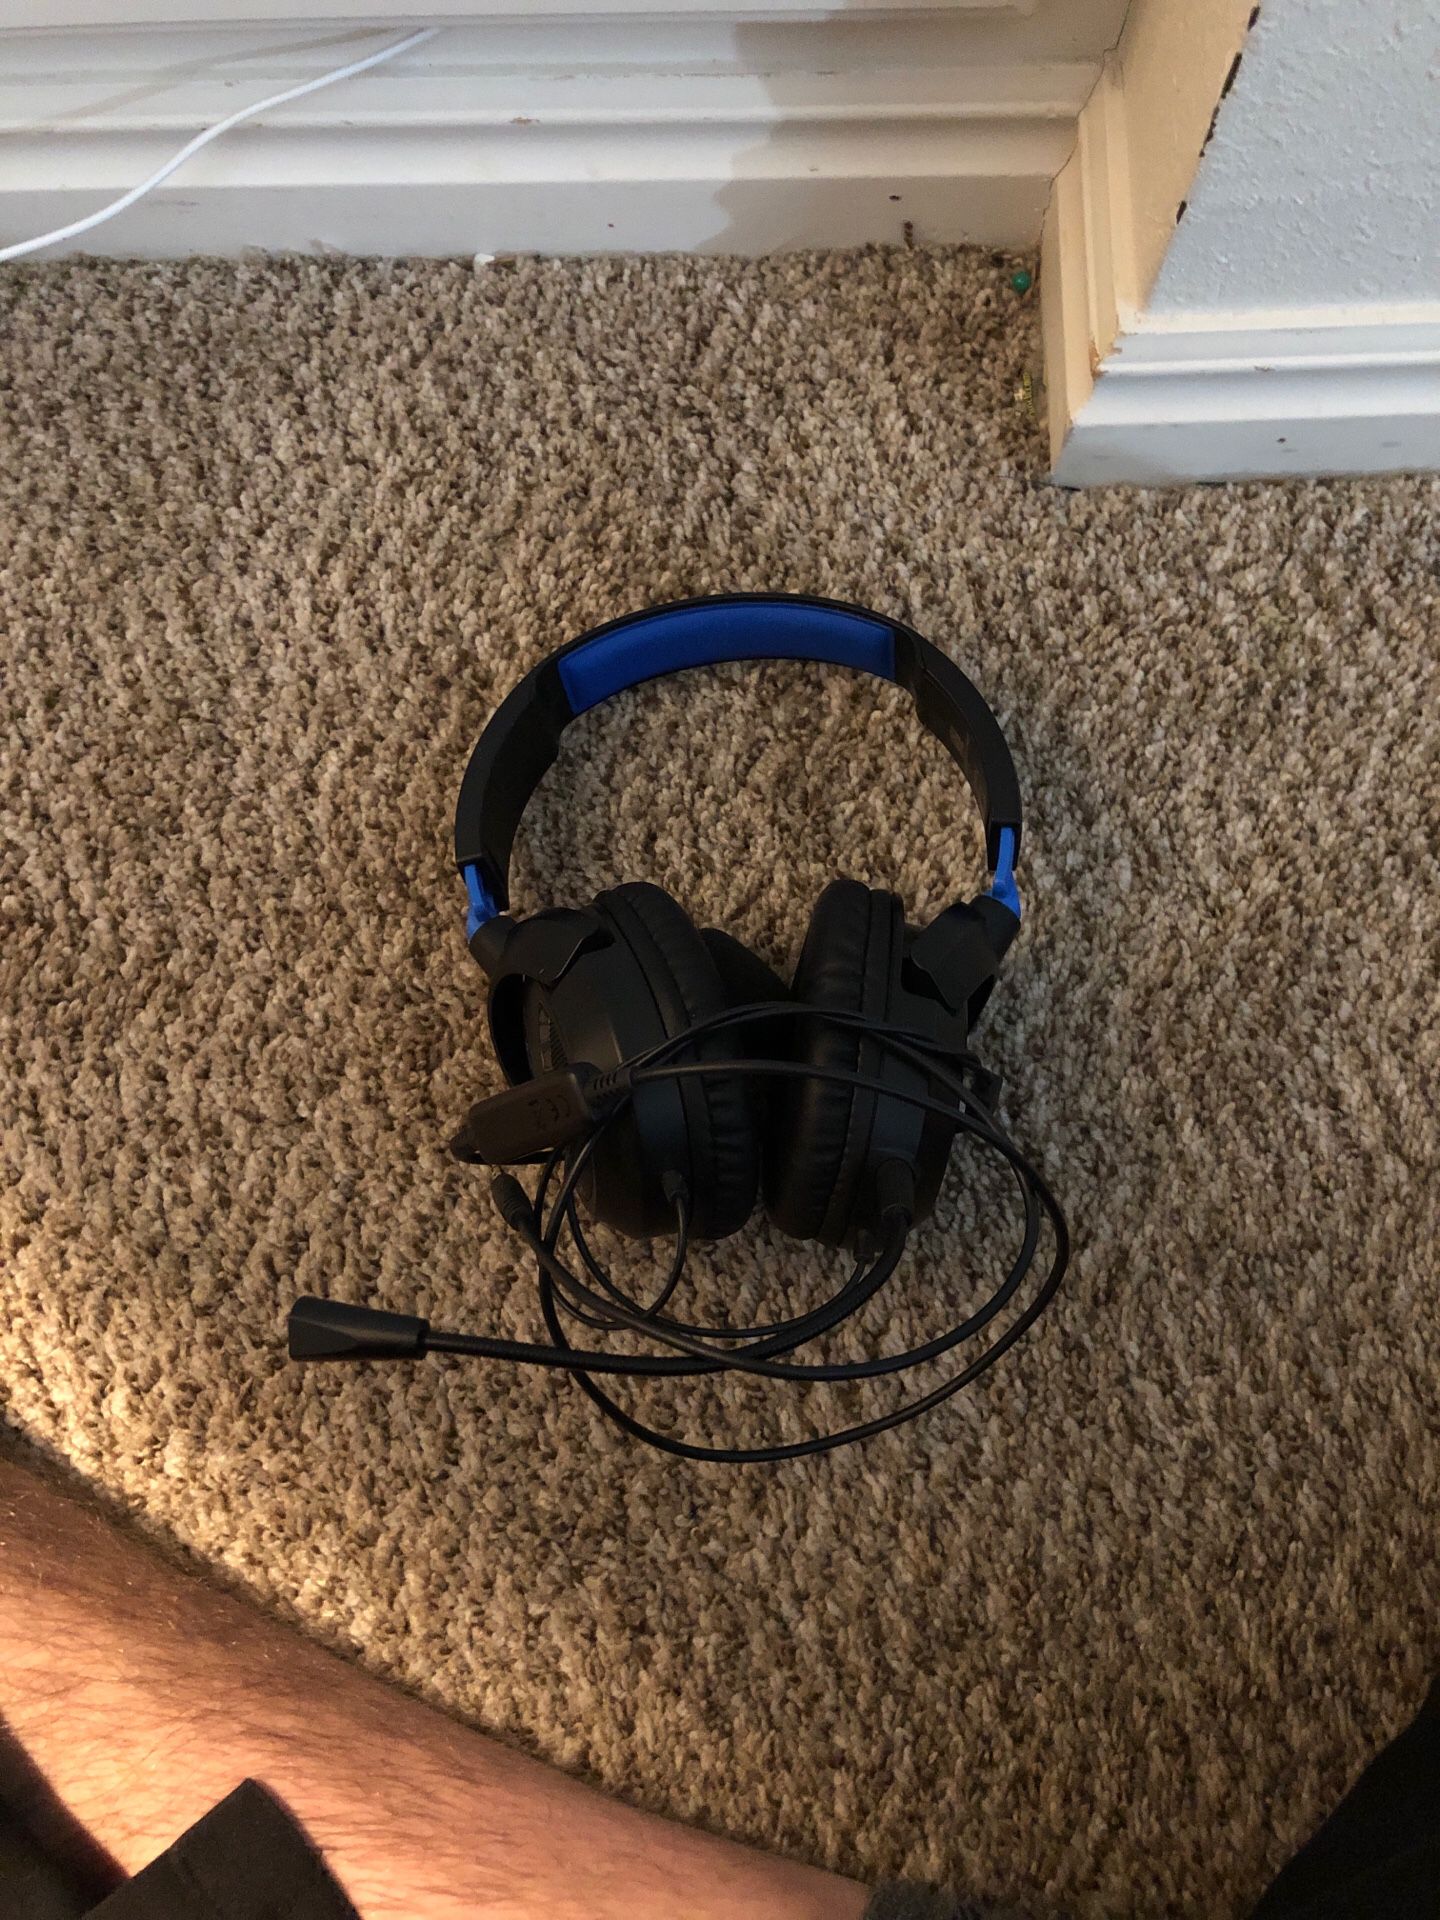 Gaming headphones works on Ps4 or others